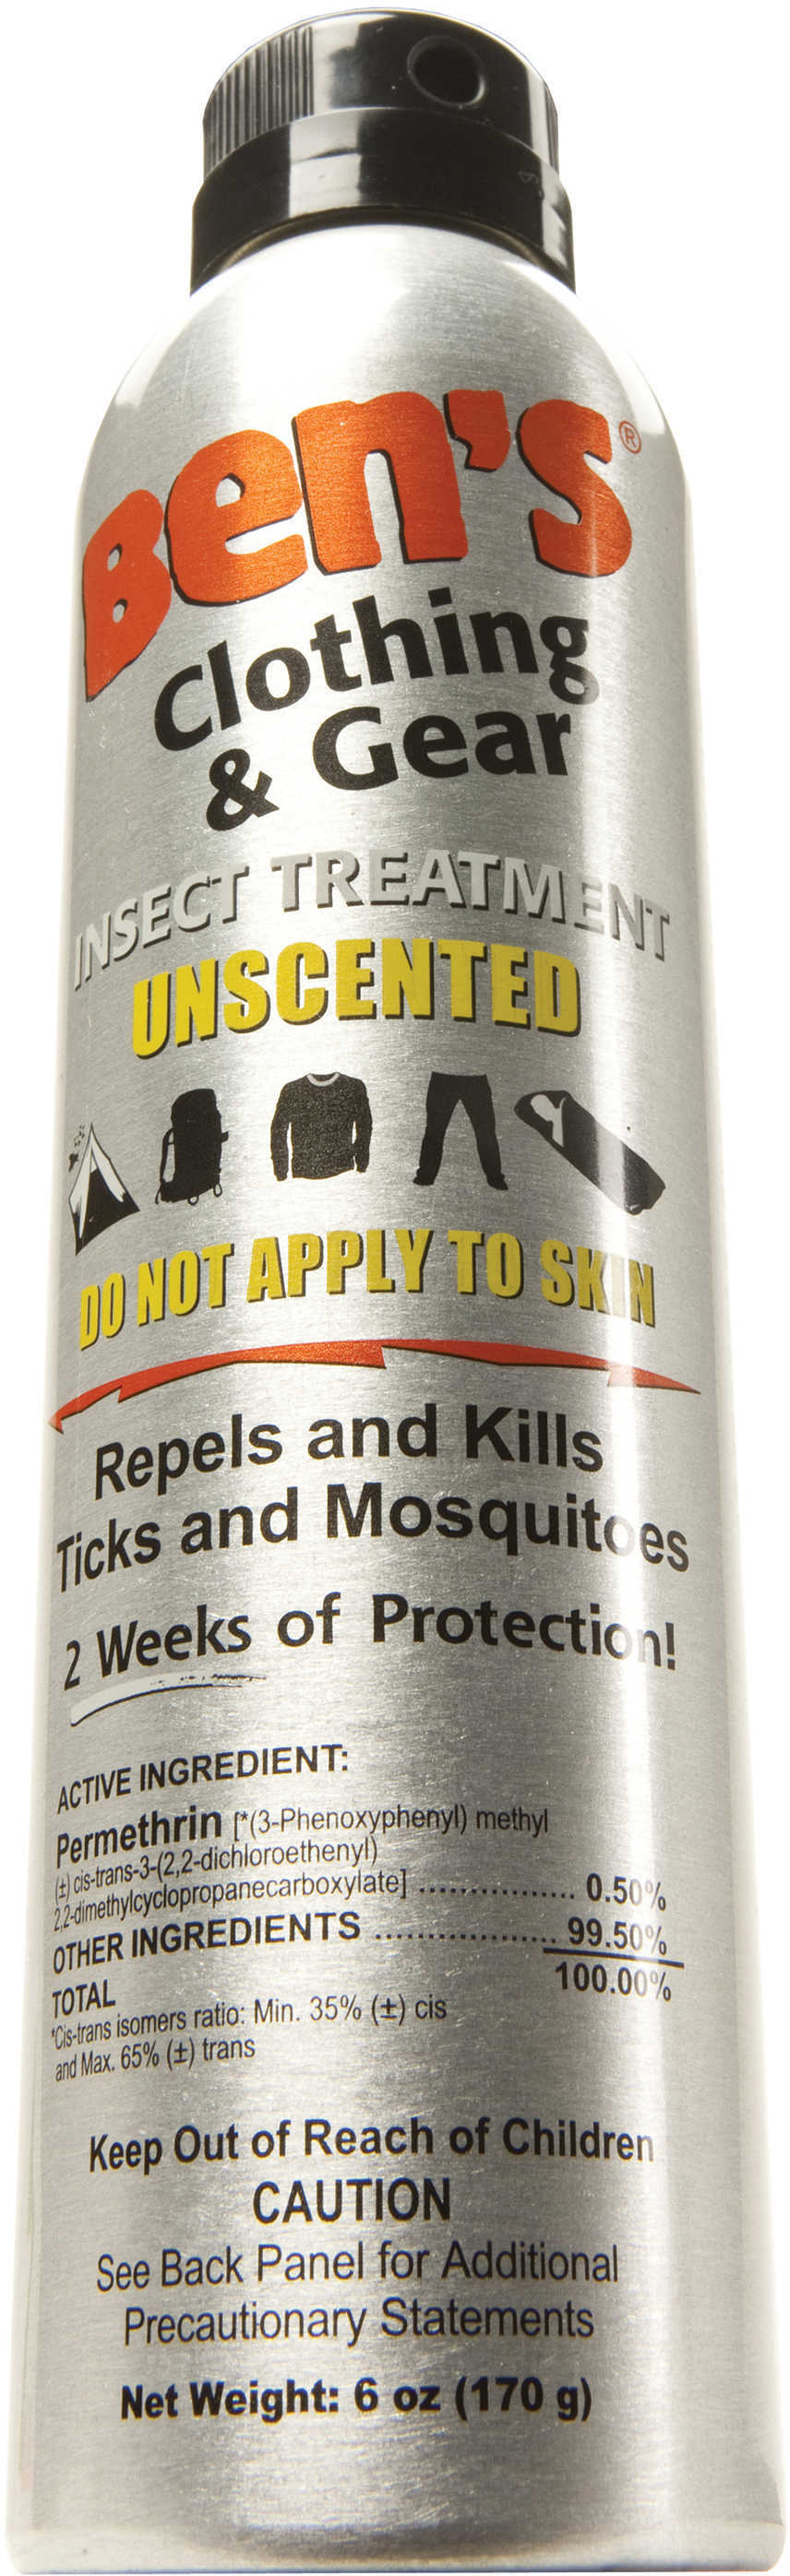 Bens Insect Repellent Clothing & Gear 6Oz Model: 0006-7600